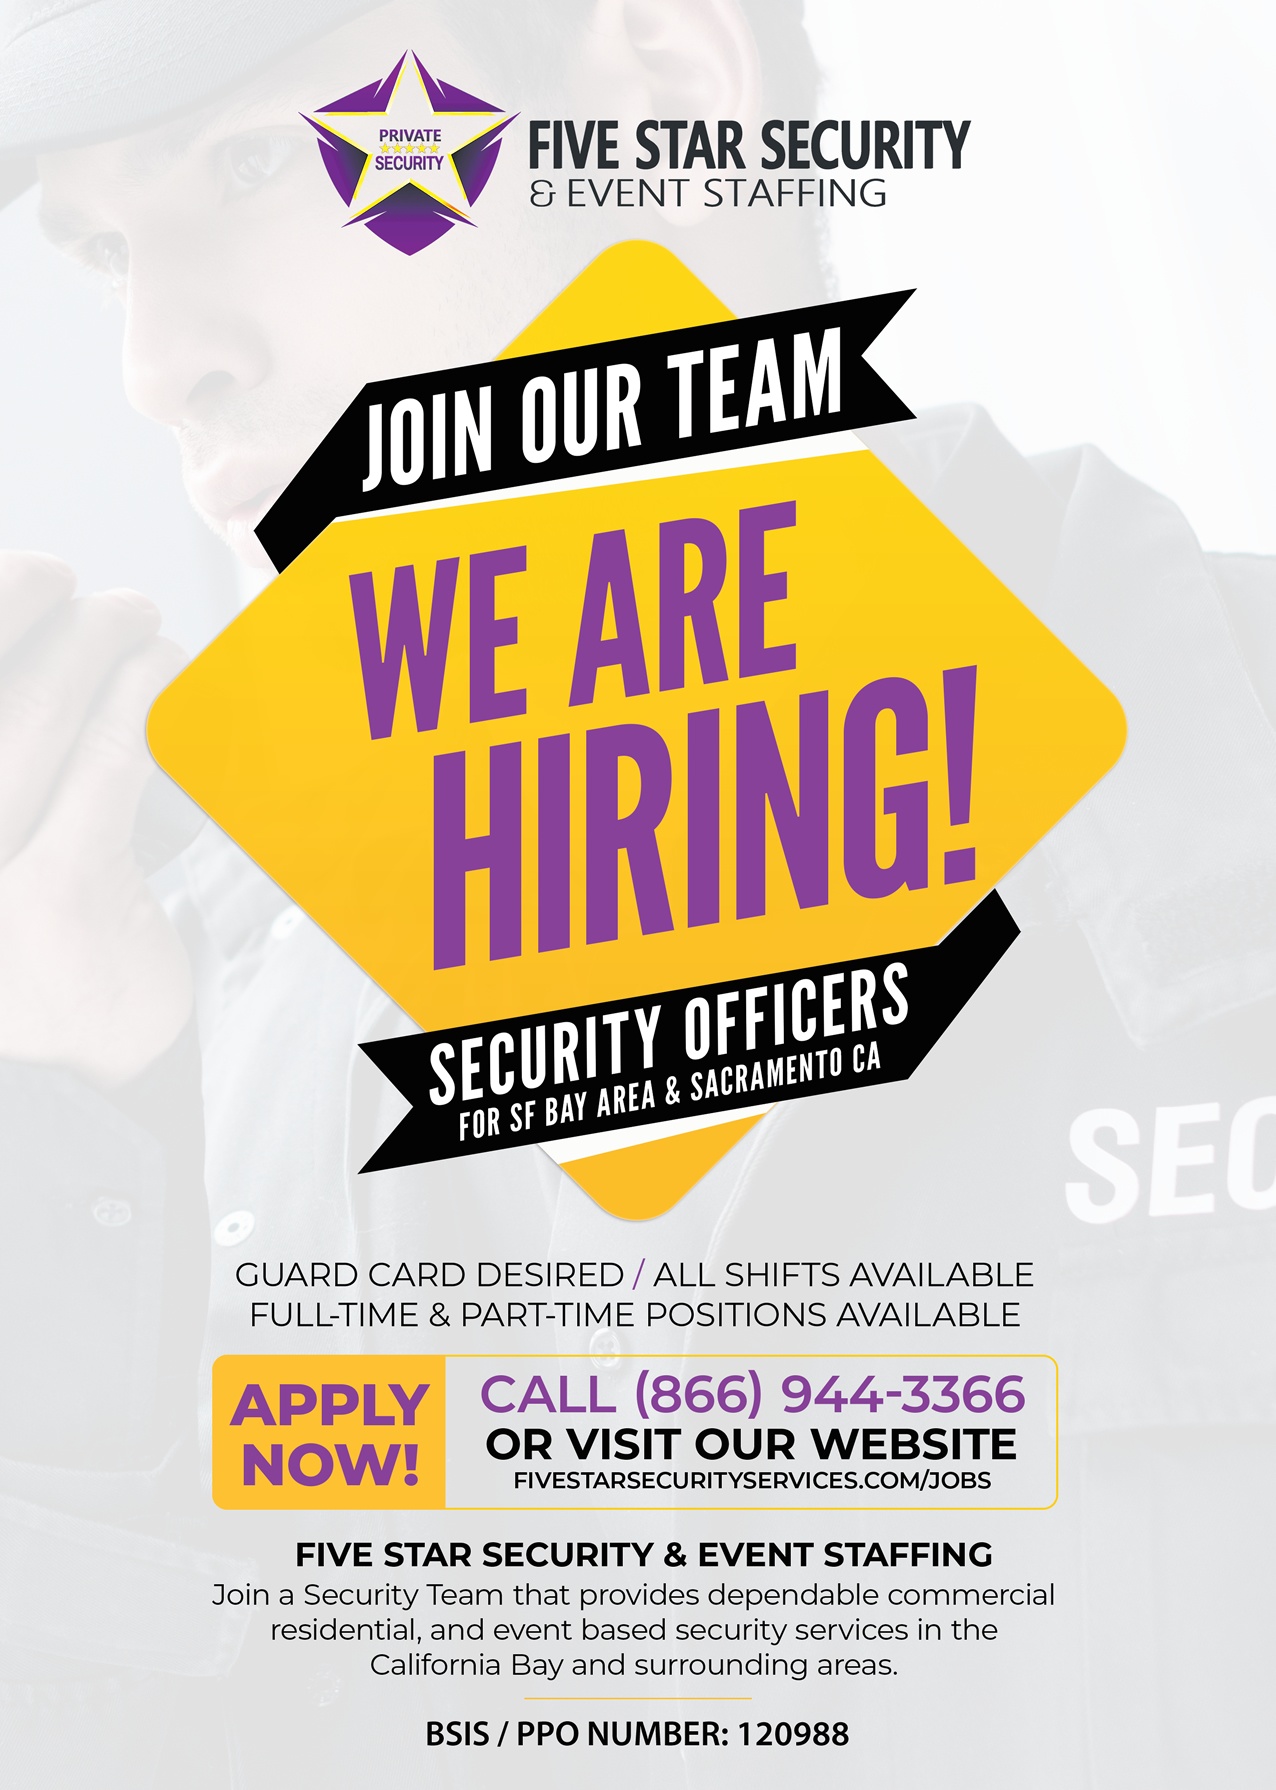 Five Star Security & Event Staffing on Rank In The City - Oakland CA | Five Star Event Staffing & Security, Private Patrol, Private Security, Event Staffing, Event Security, Armed Security | We Are Hiring Flyer - Security Officers